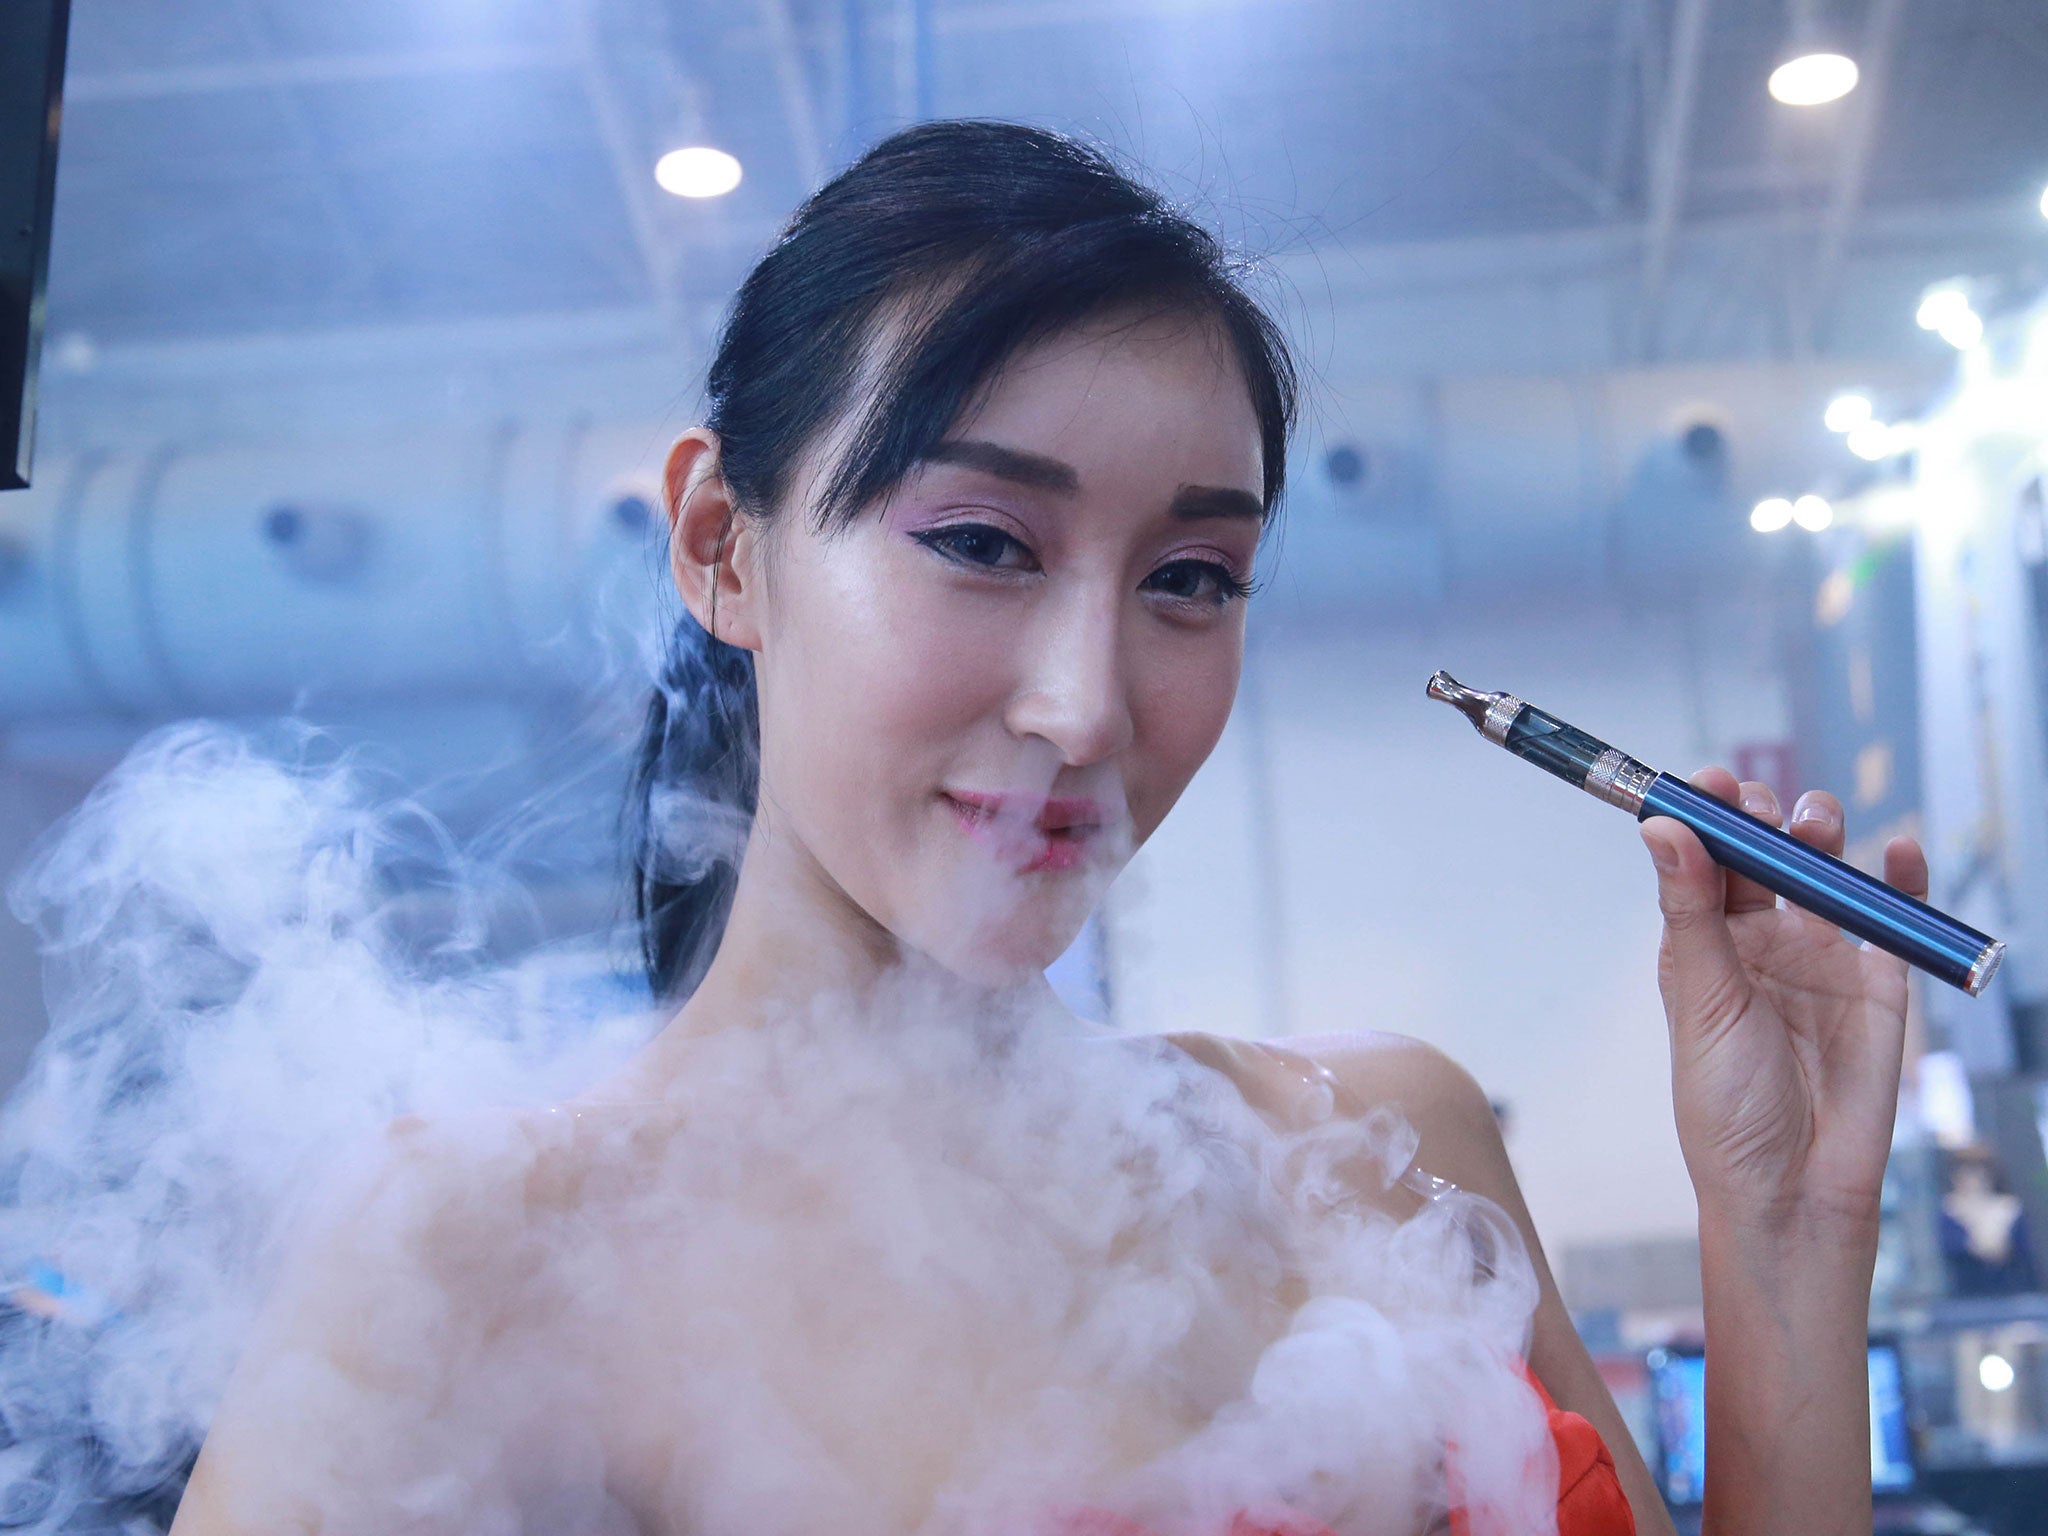 Selling e-cigarettes to minors will be outlawed in October 2015